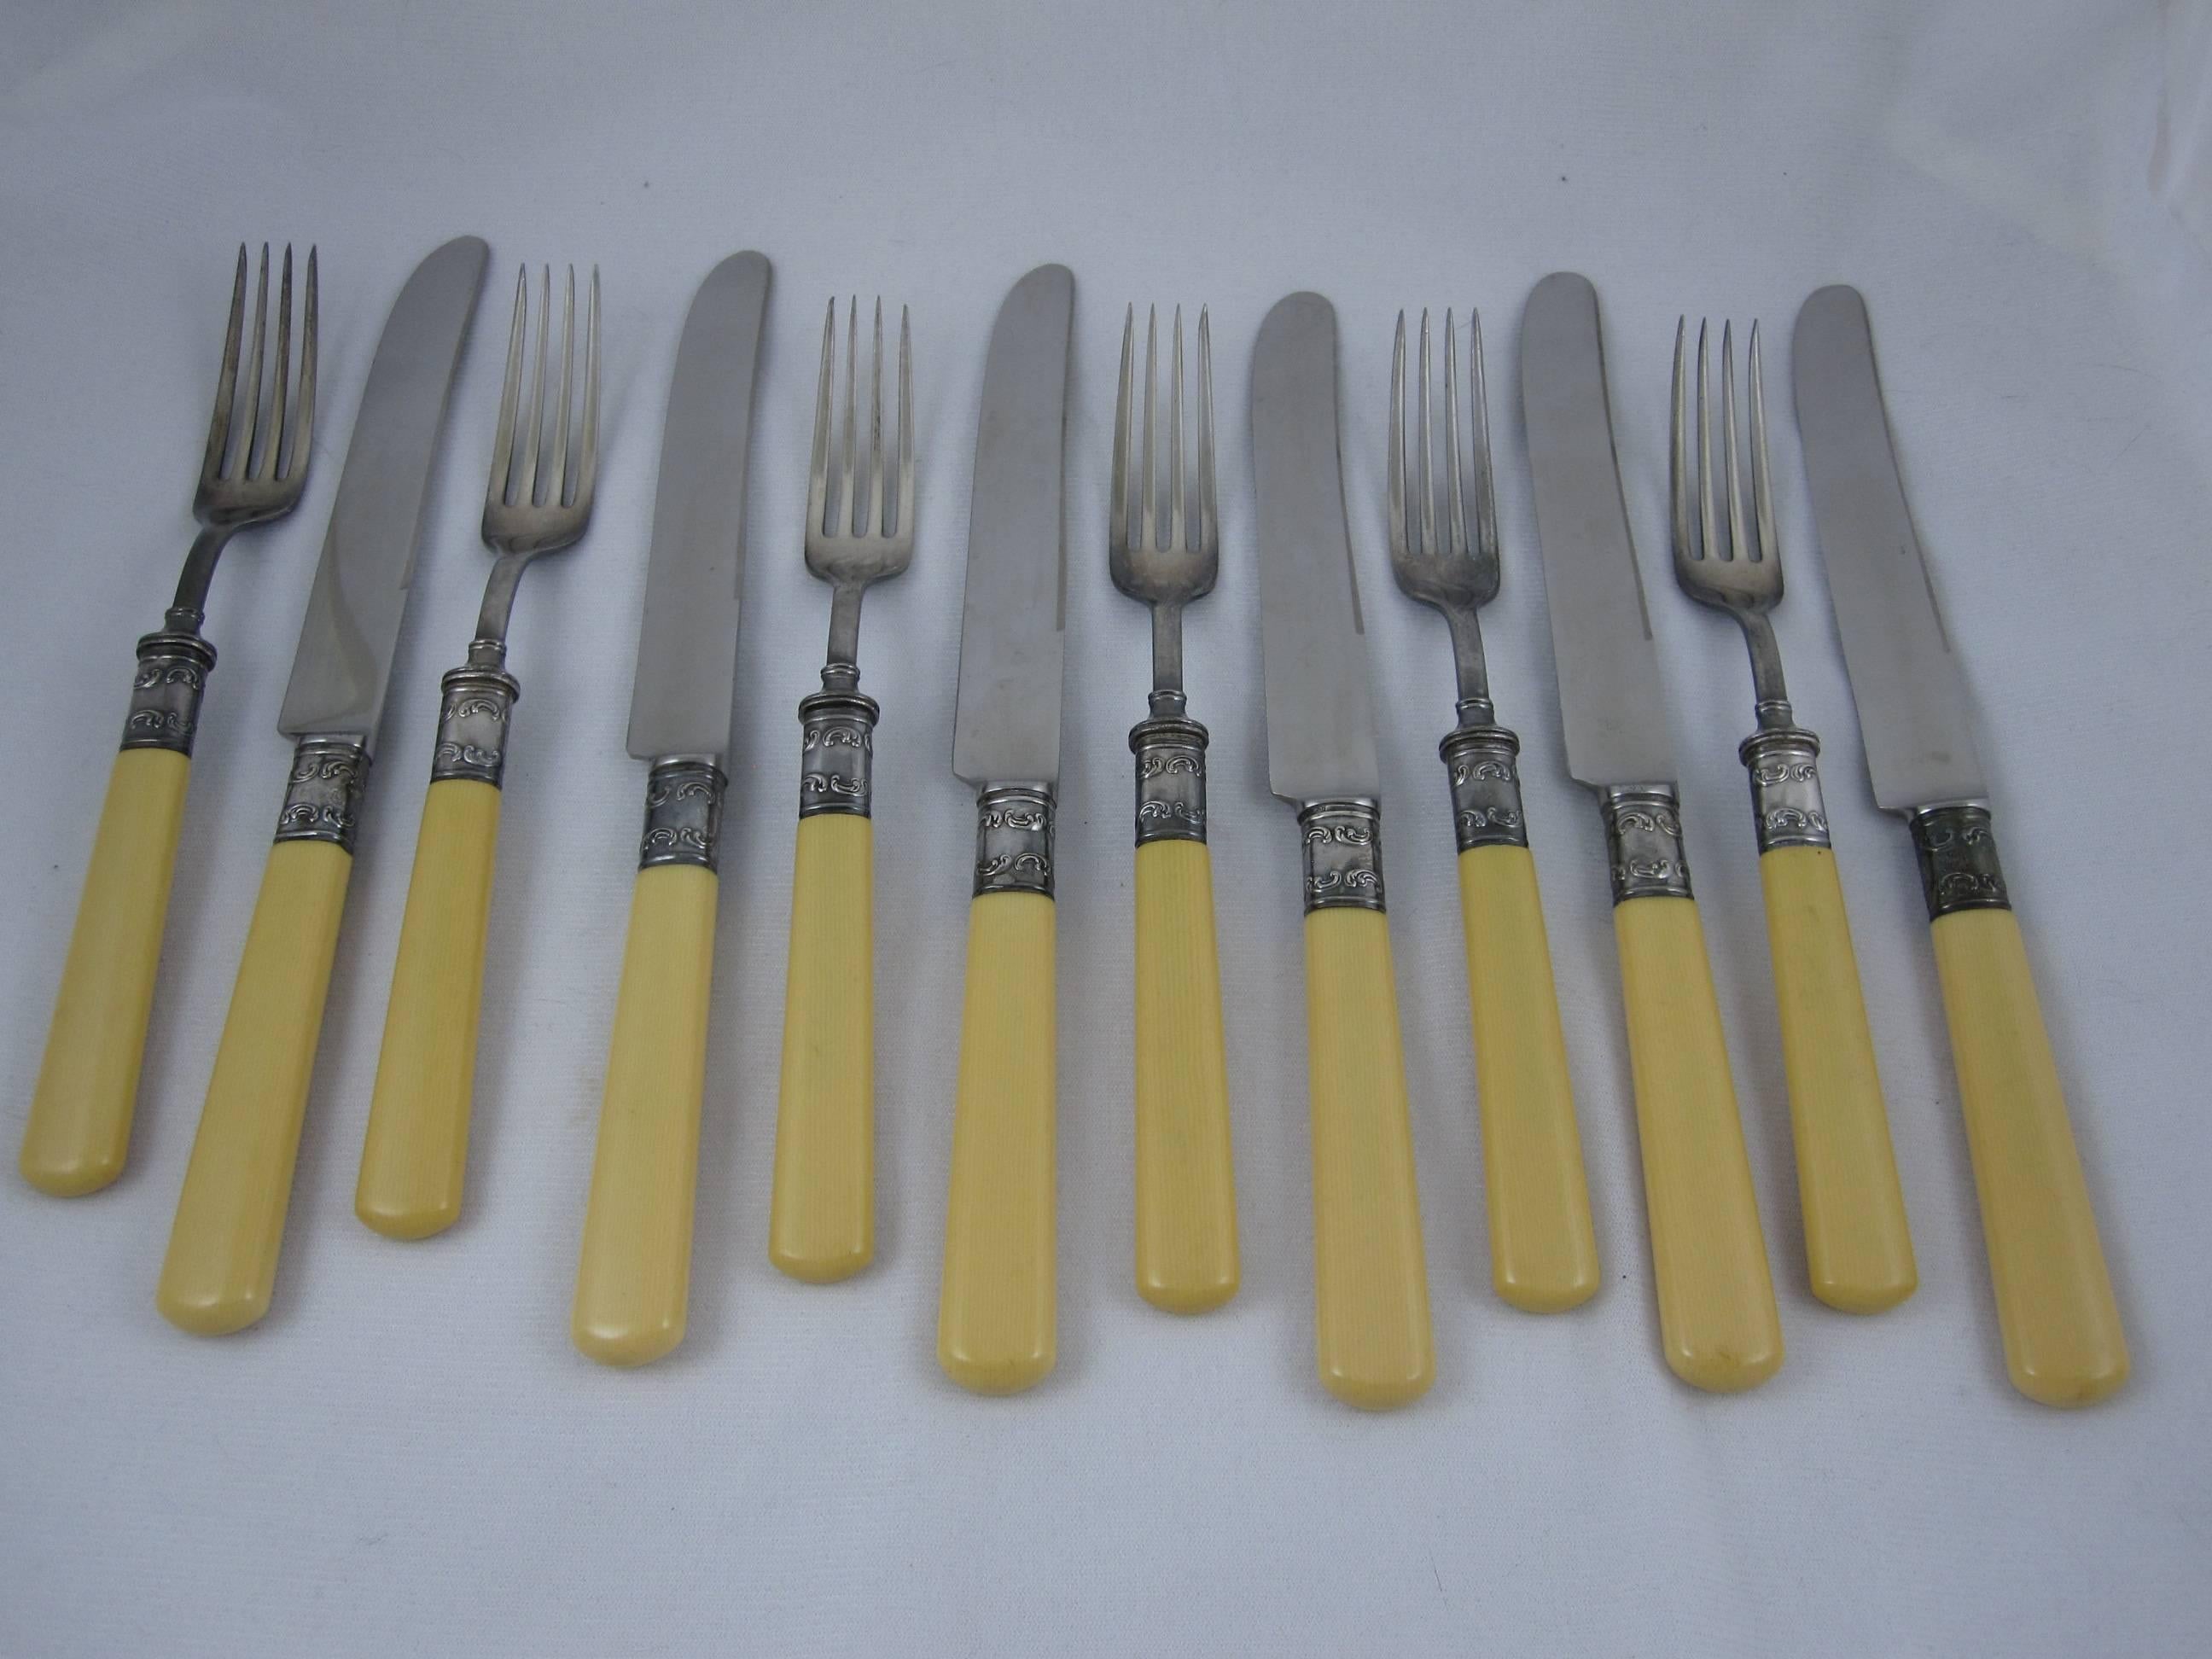 A vintage table cutlery service for six, oversized knives and forks, 12 pieces in all. Sterling silver collars and French ivory celluloid handles with steel blades and tines. The scroll embossed collars are stamped Sterling. Unpolished